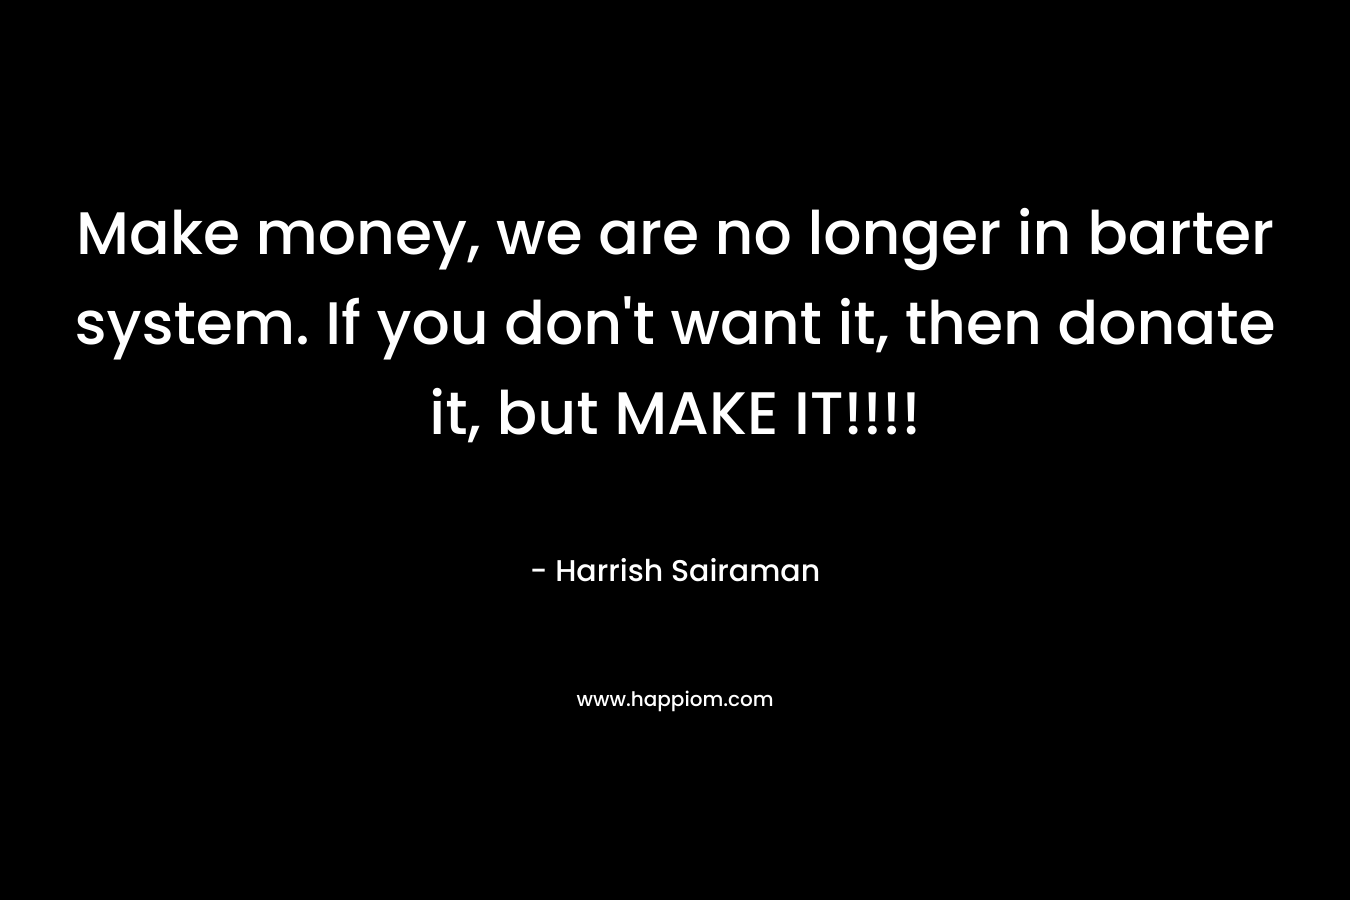 Make money, we are no longer in barter system. If you don’t want it, then donate it, but MAKE IT!!!! – Harrish Sairaman